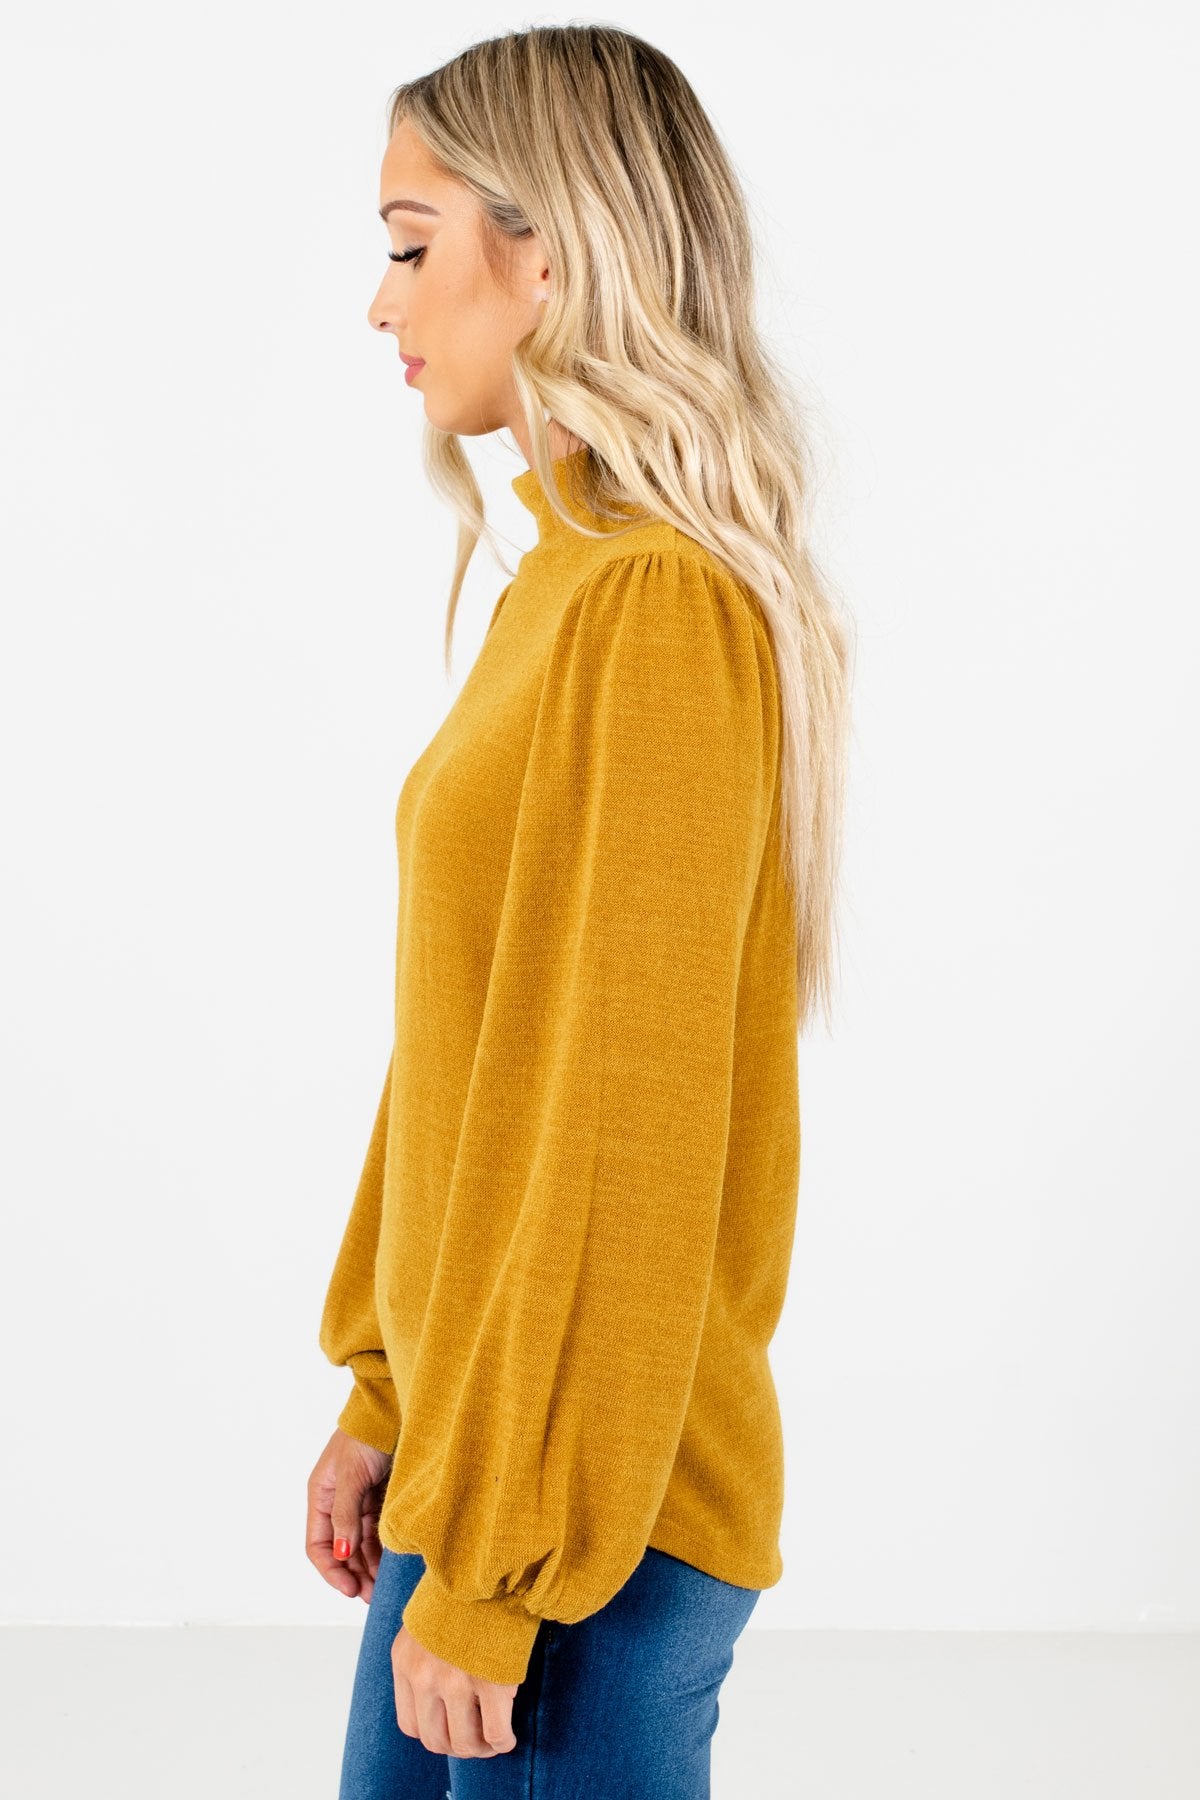 Mustard Yellow Bishop Sleeve Boutique Tops for Women